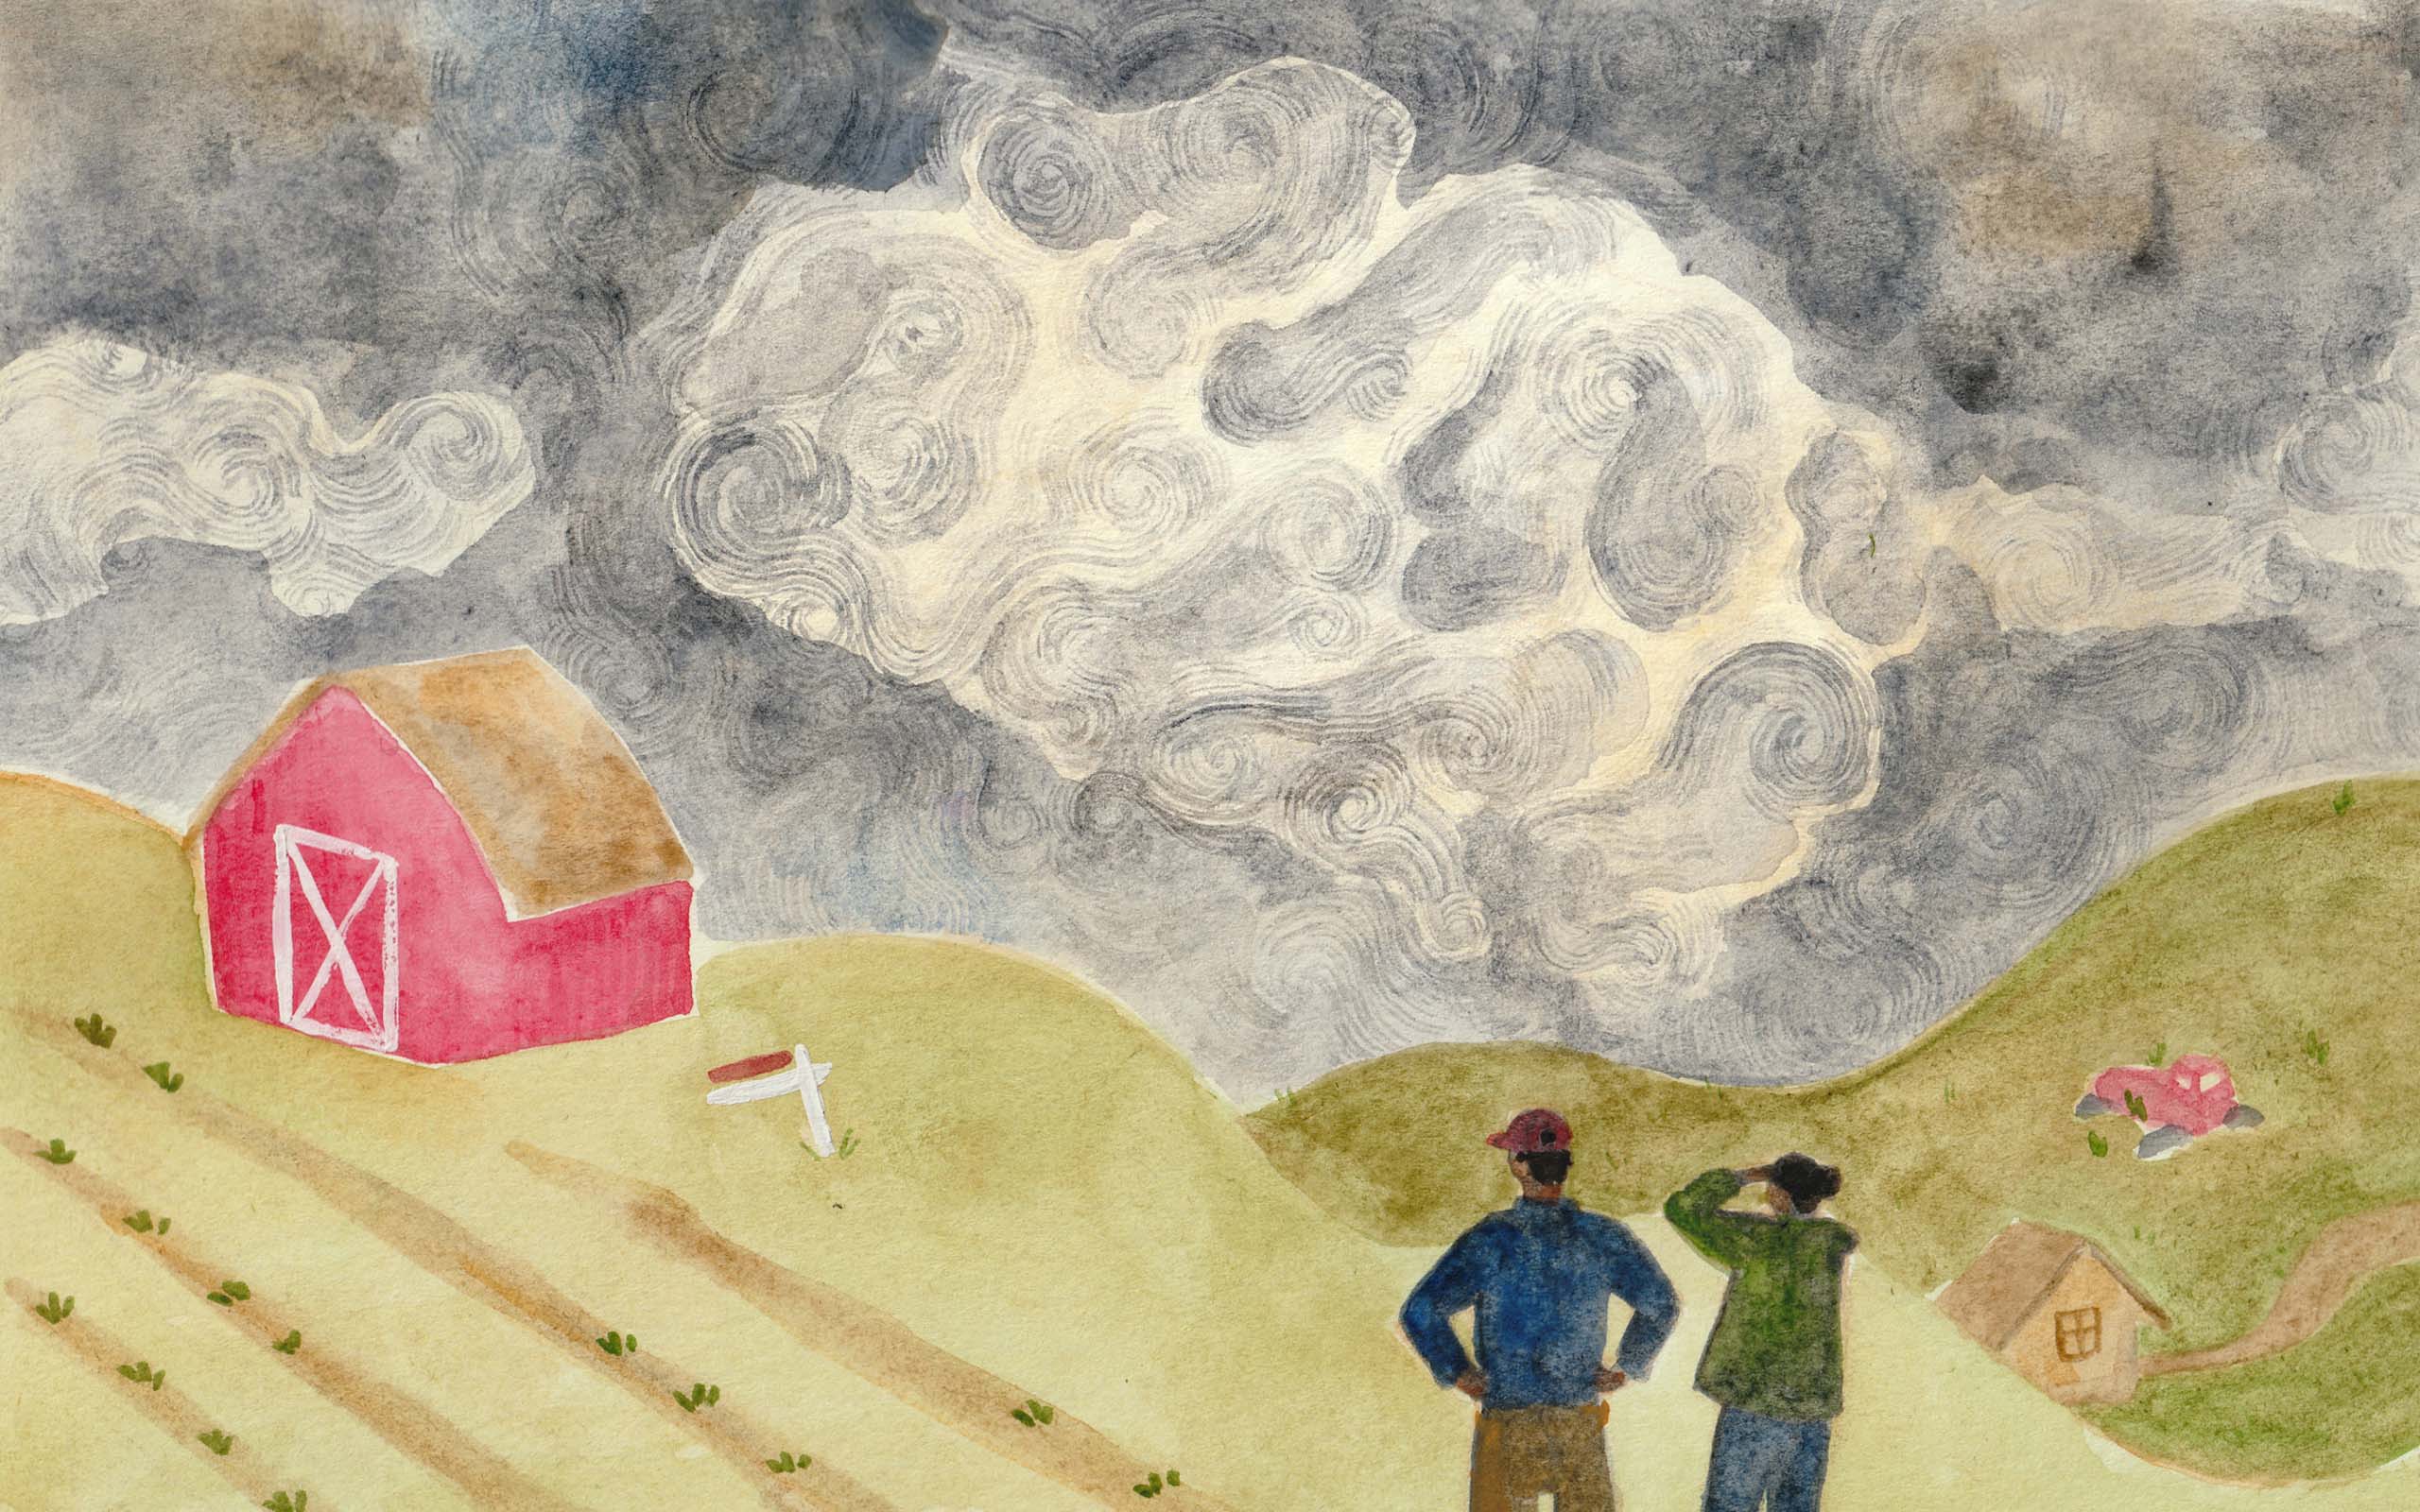 Two Black farmers in the bottom right hand corner look up at a sky of swirling clouds in the shape of a brain overlooking their land with a red barn. Watercolor, March 2022